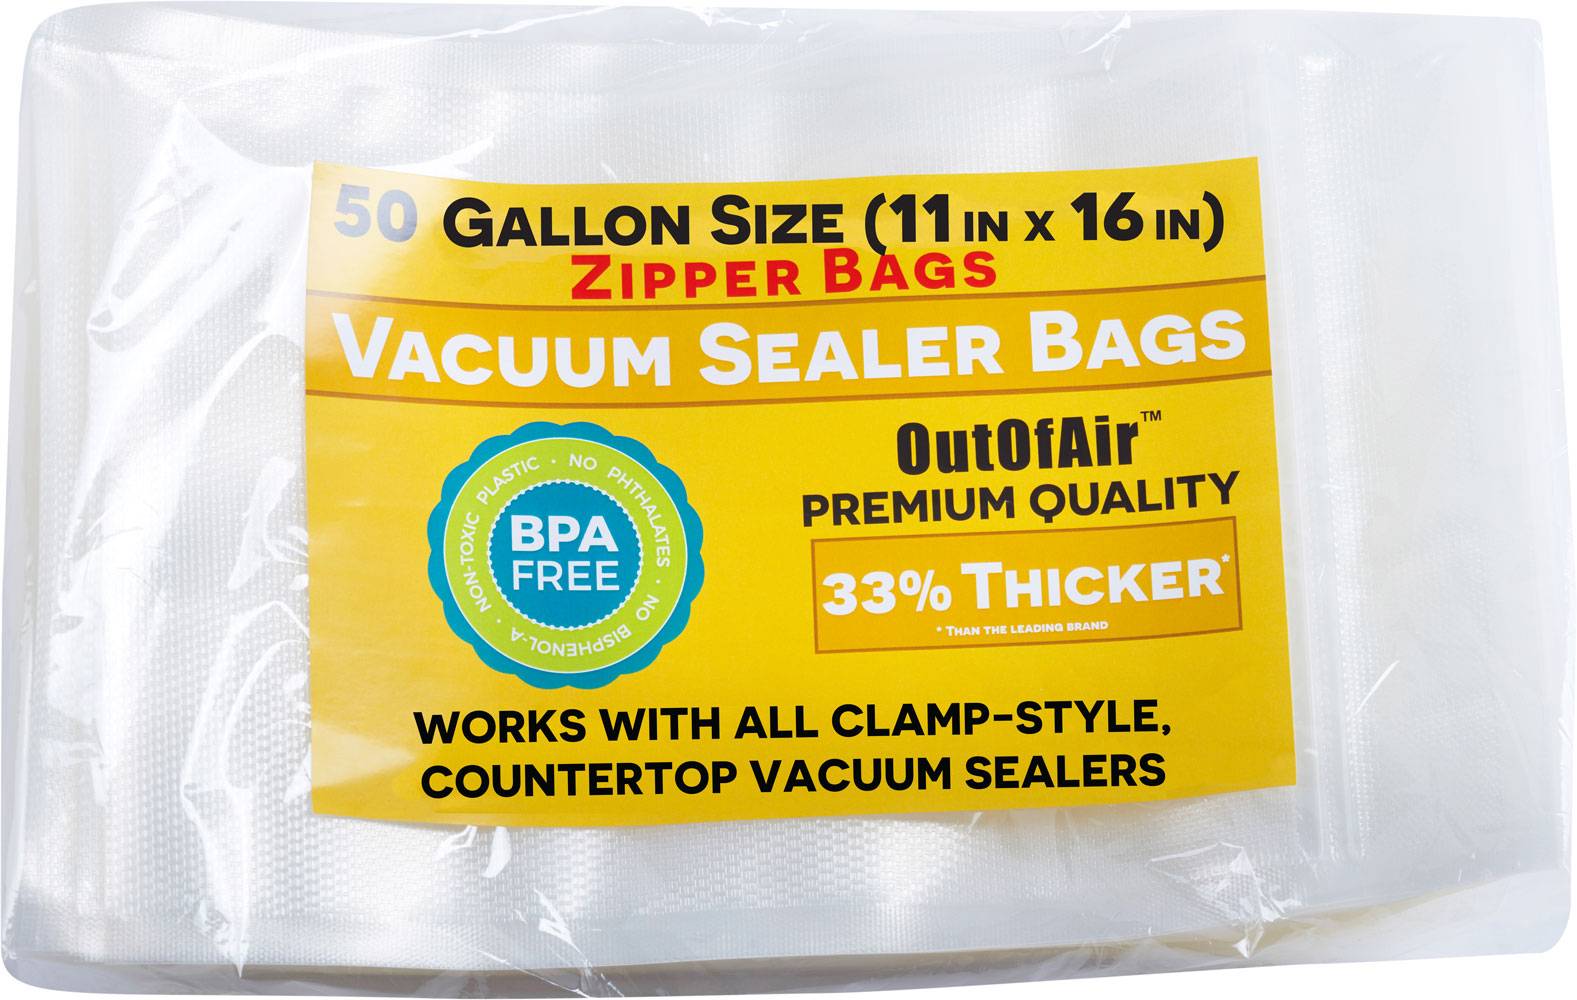 50 FoodVacBags Gallon-Sized 11 inch x 16 inch Zipper Black Back & Clear Front Reusable Vacuum Sealer Bag